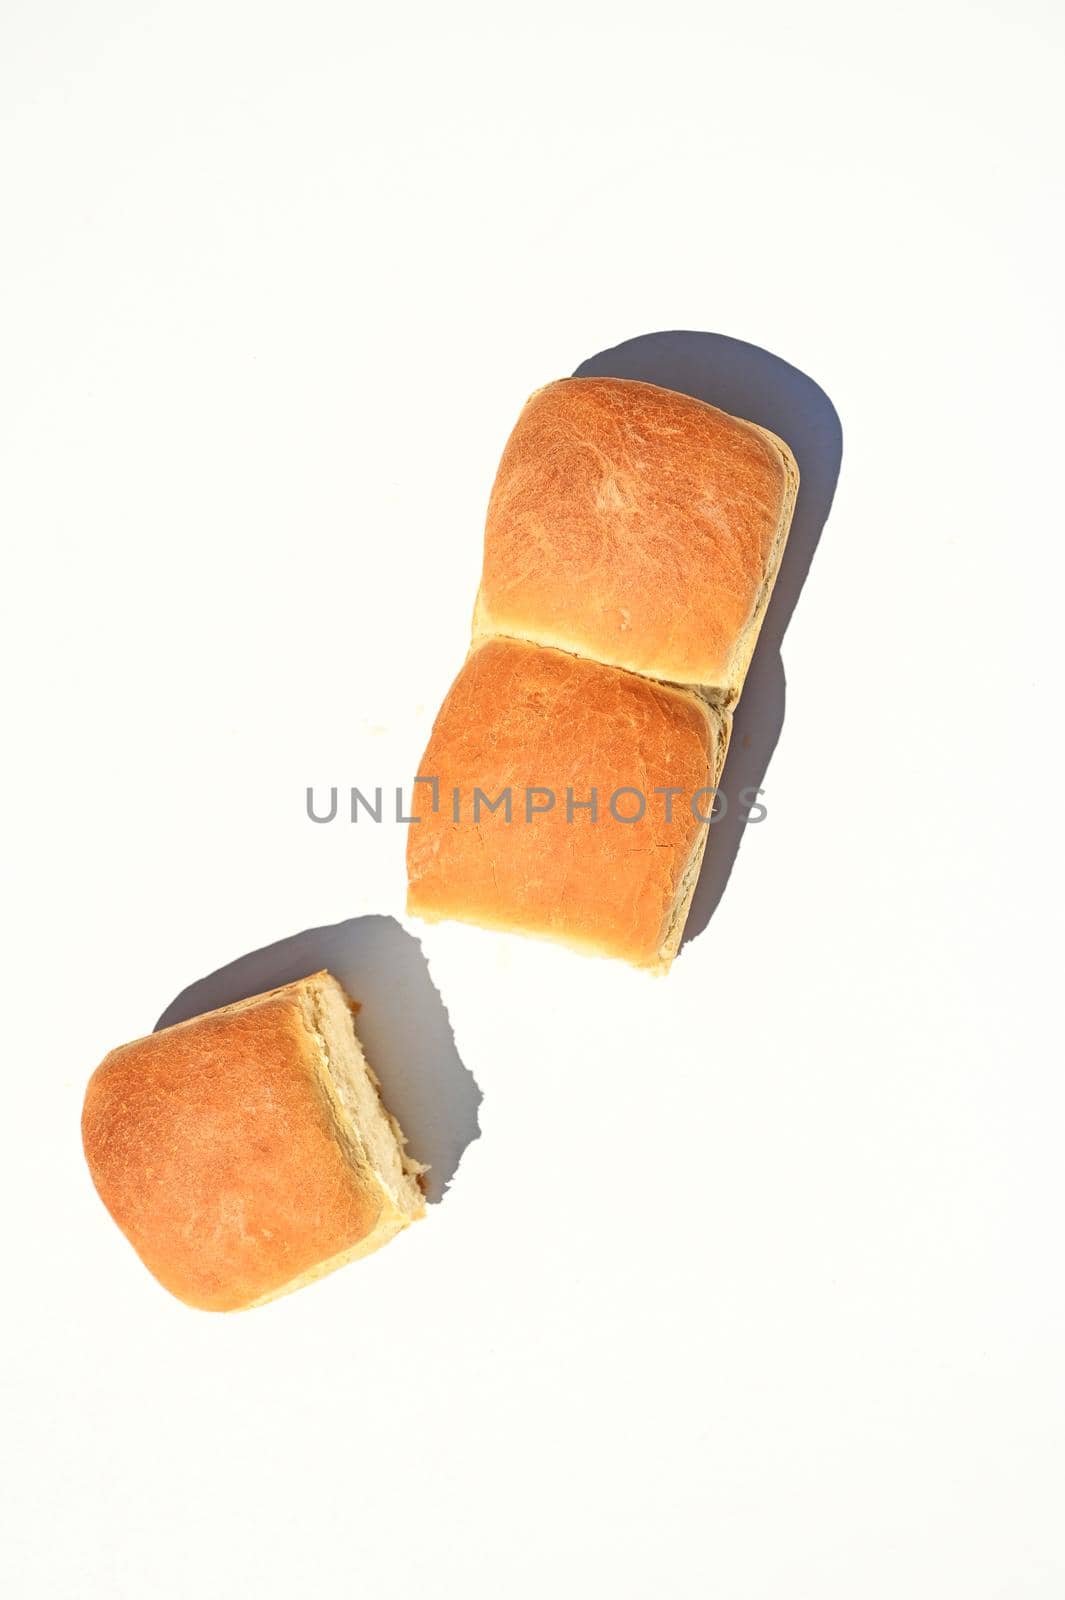 Flat lay composition of a fresh baked whole grain buns on a white background with copy ad space for advertising text.